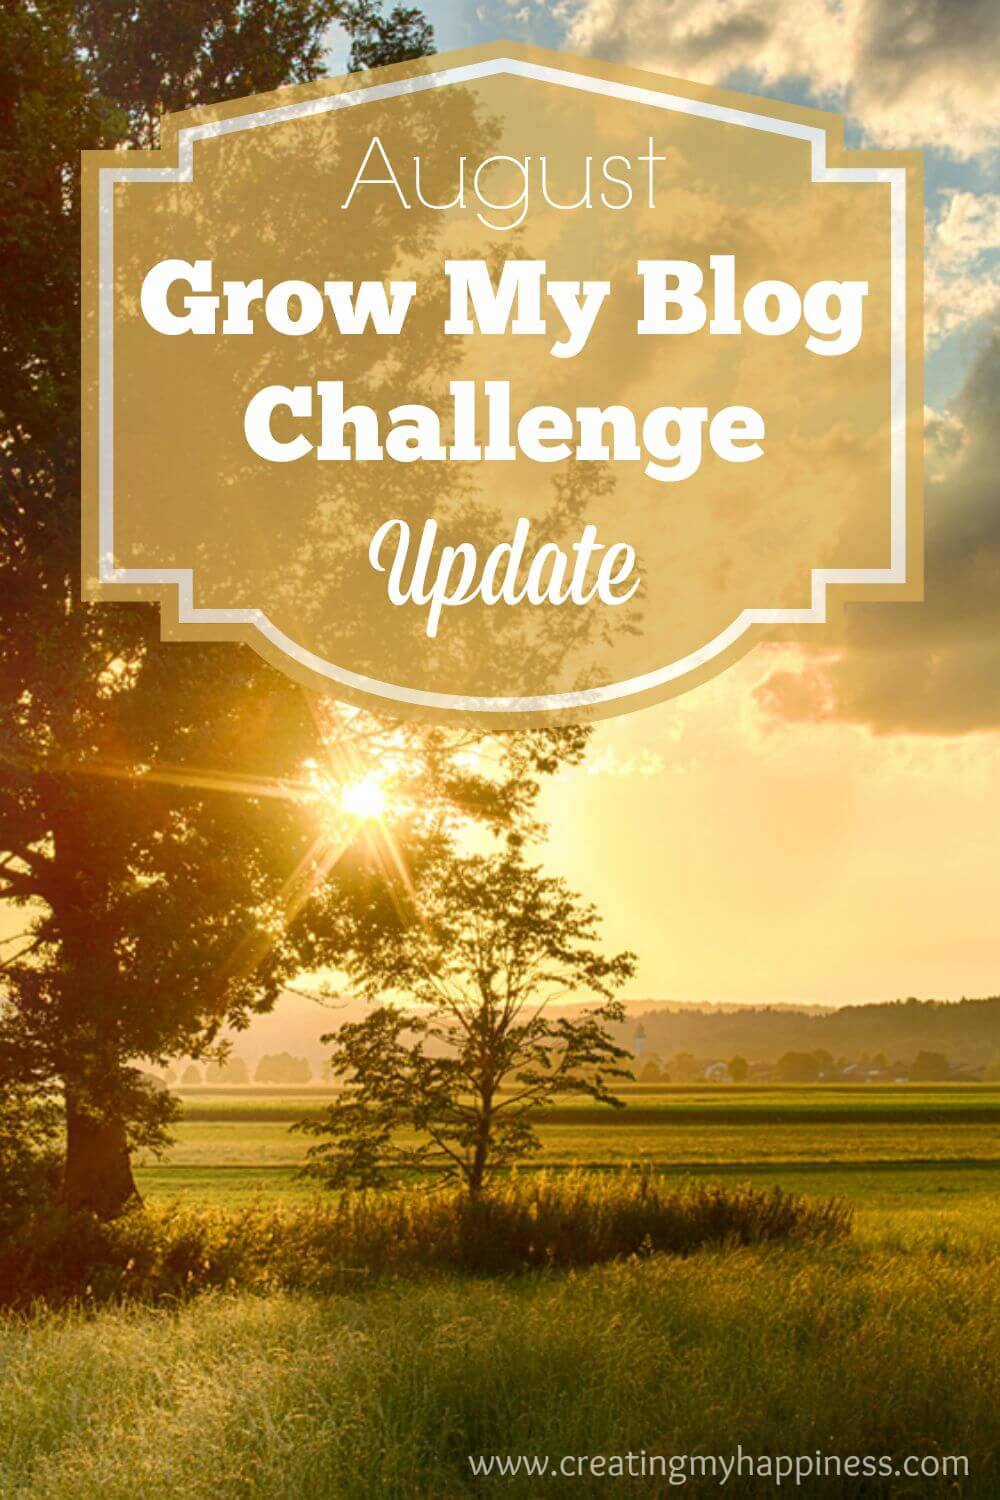 A monthly report of my blog's growth and what's coming next. If you're a blogger who's looking to grow, come join us at the grow my blog challenge.